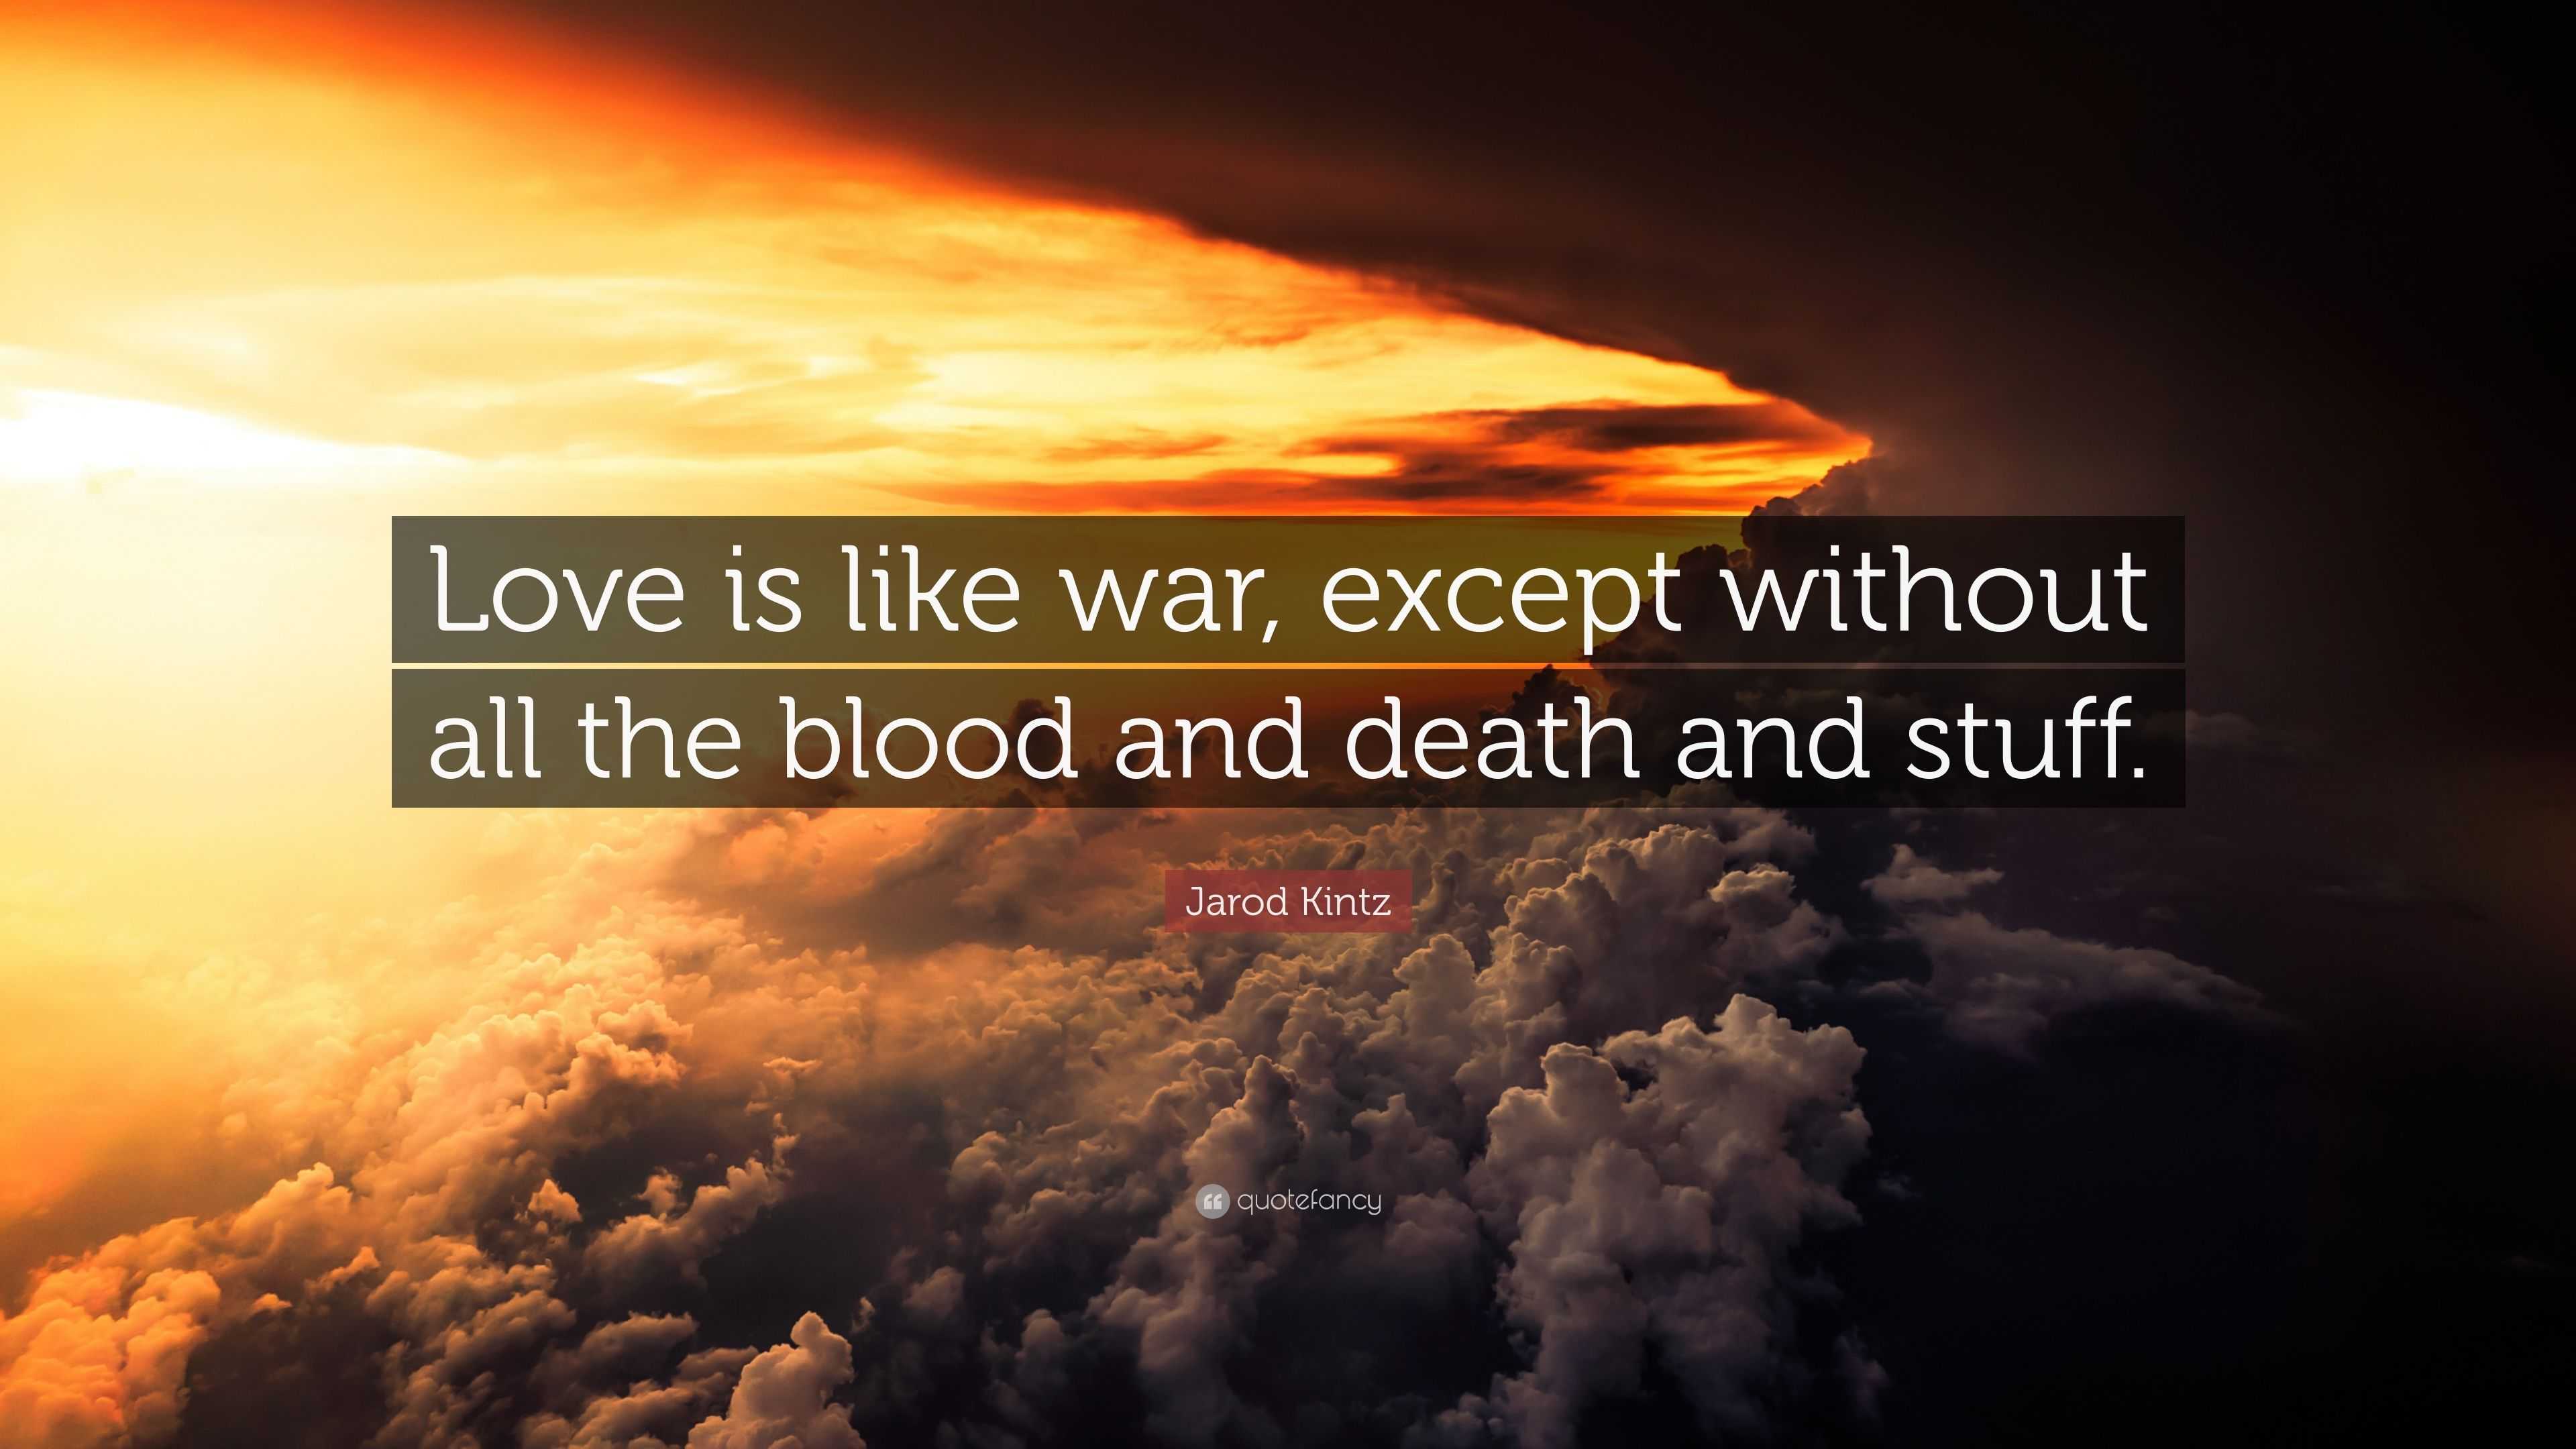 Jarod Kintz Quote “Love is like war except without all the blood and